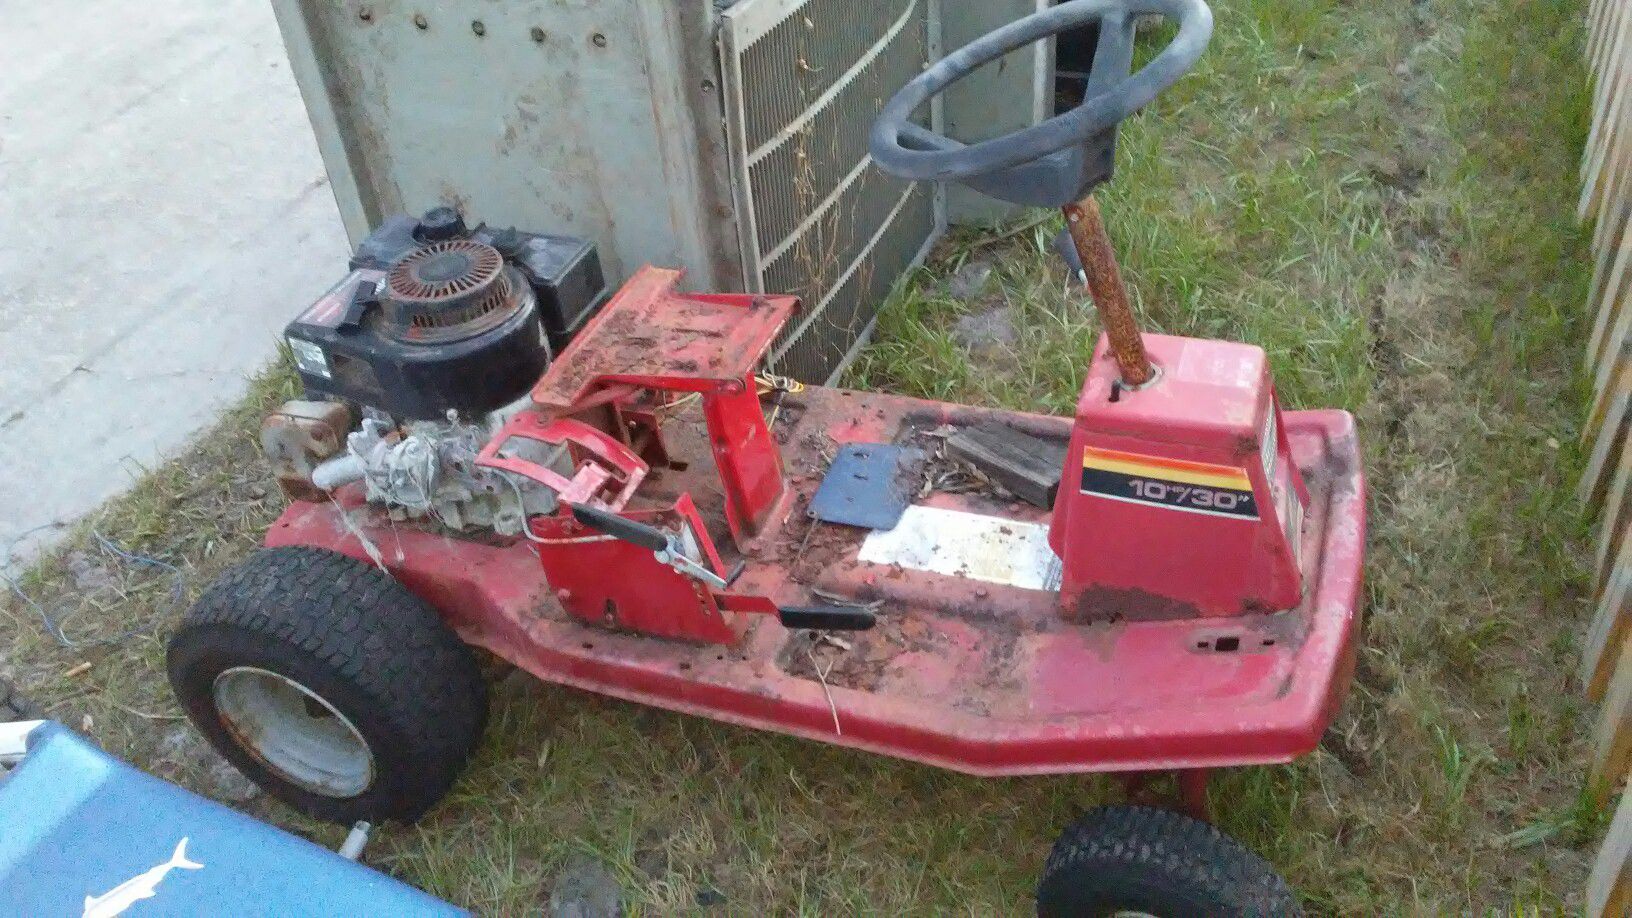 Snapper riding mower